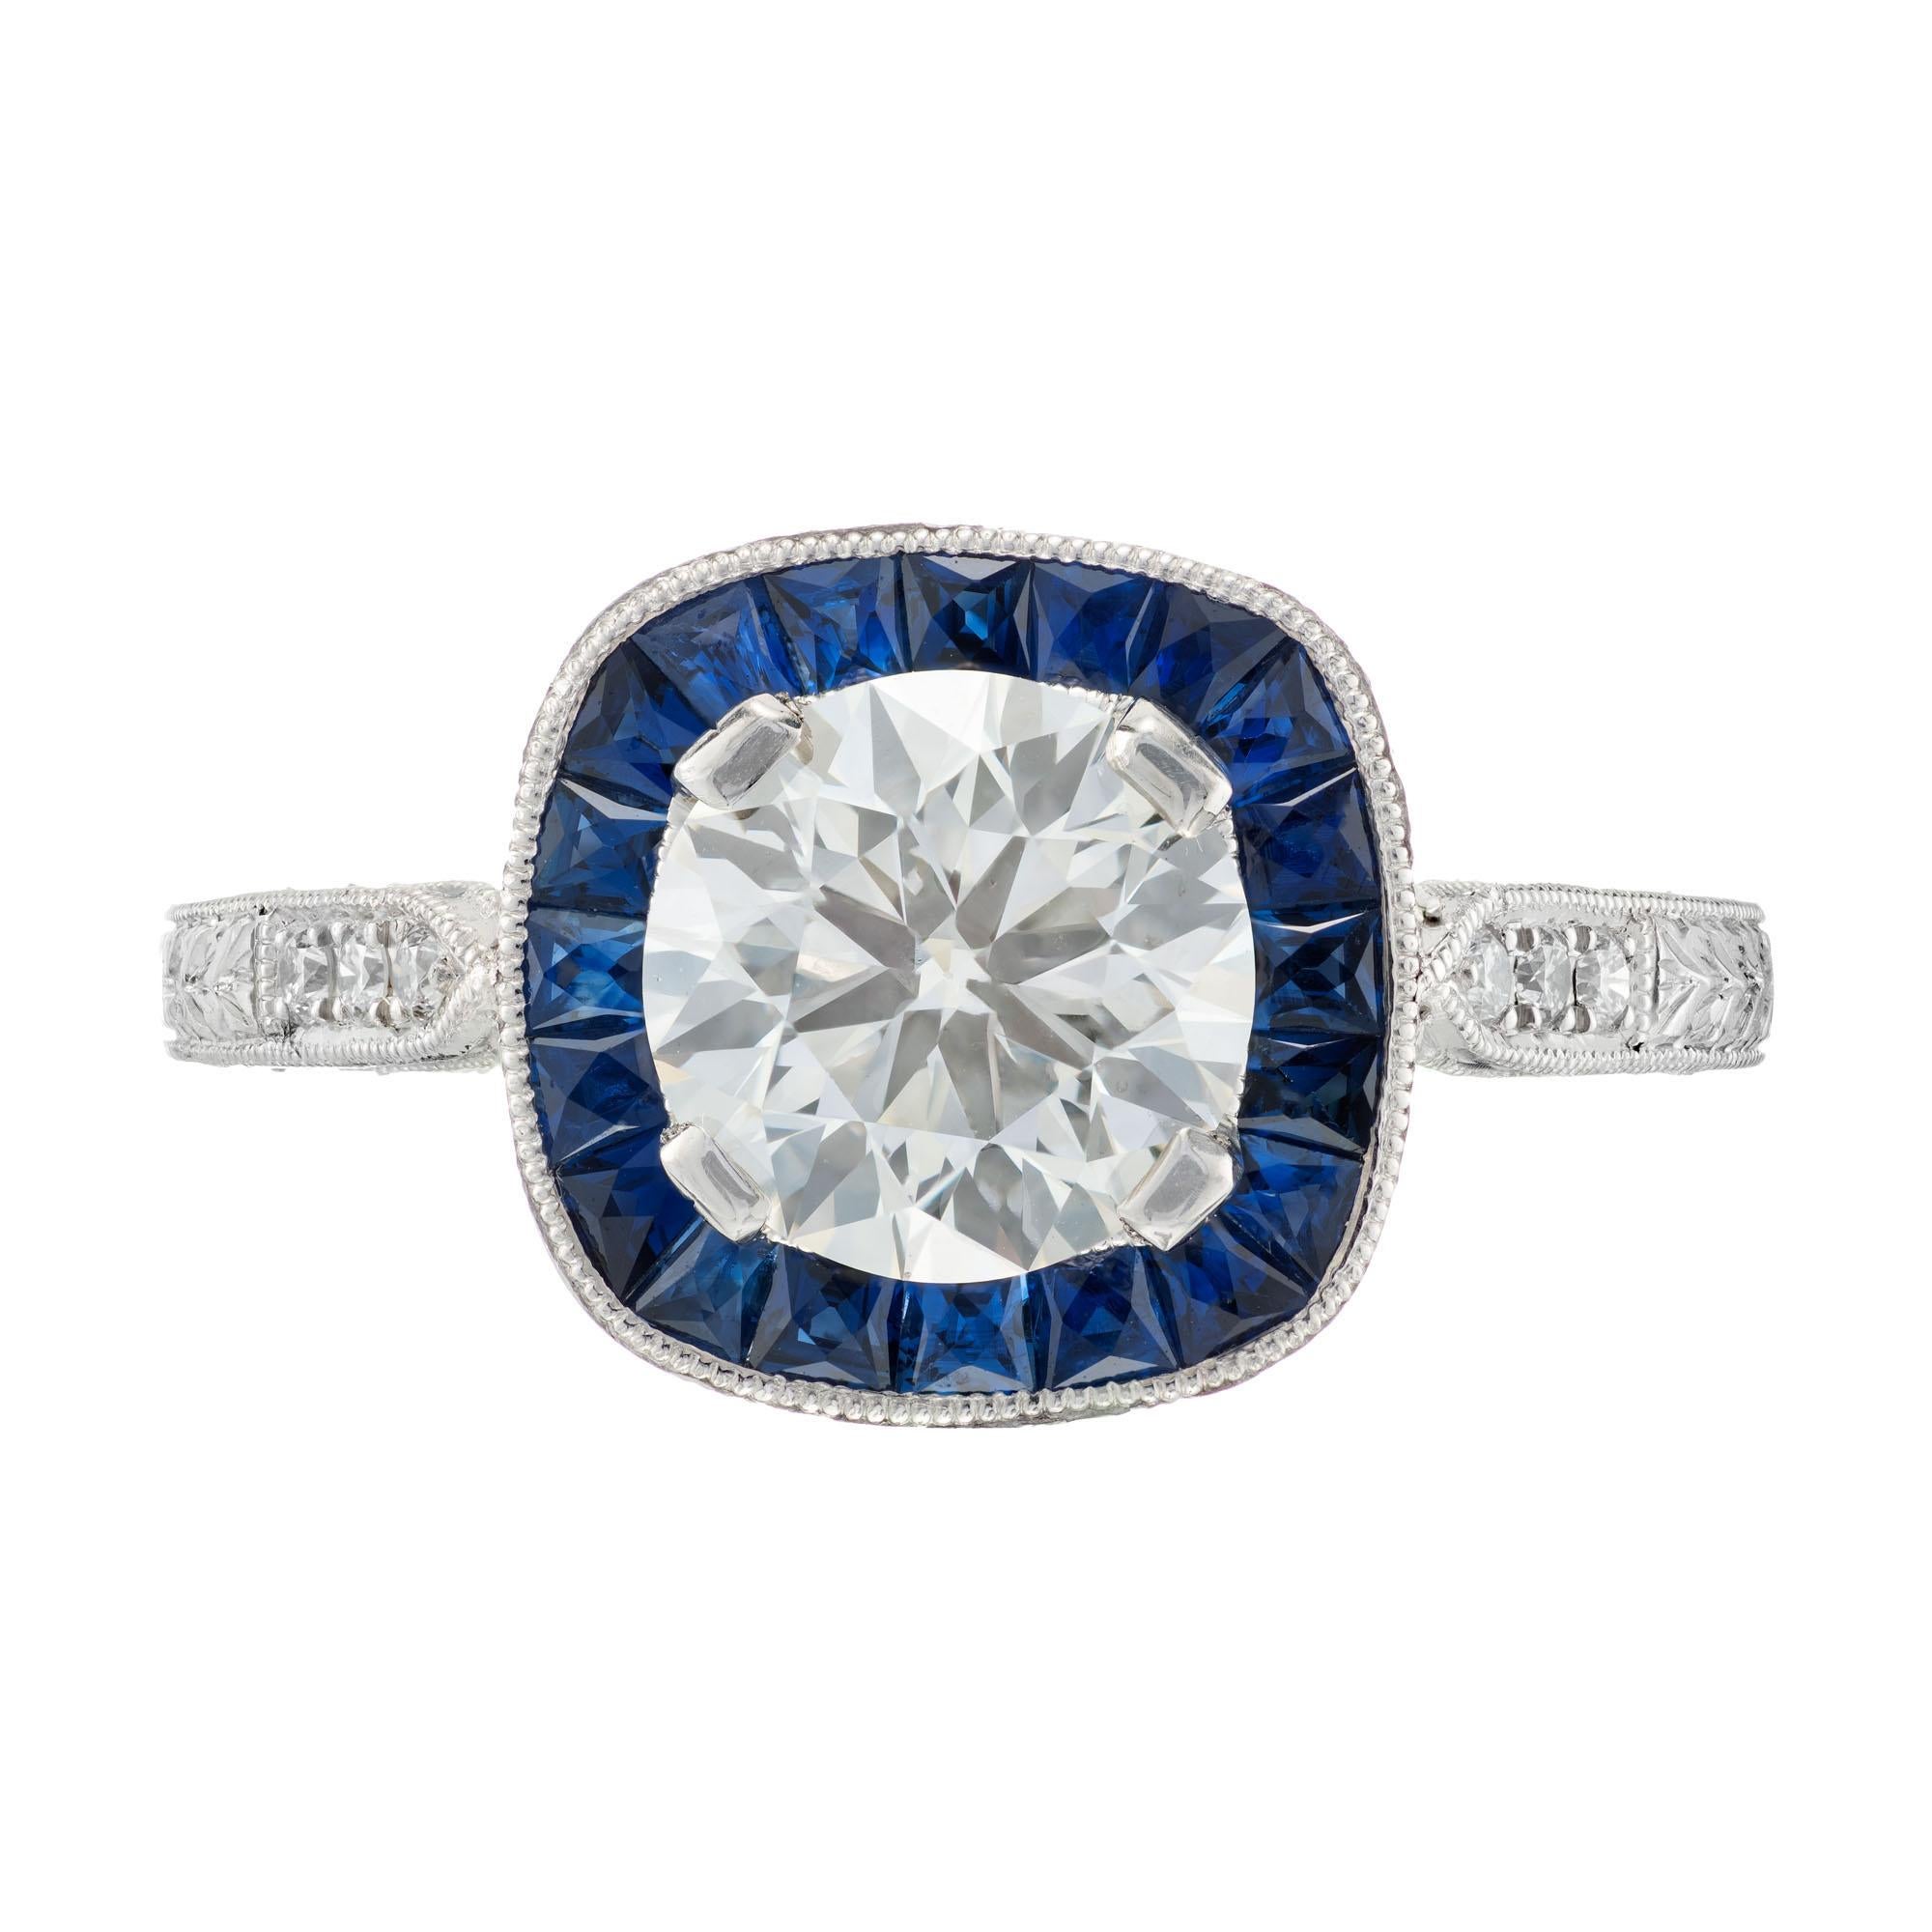 Peter Suchy diamond and sapphire platinum engagement. GIA certified round center stone with a halo of calibre sapphires in a platinum hand engraved setting. 

1 round diamond L VVS2, approx. 1.50ct GIA Certificate # 5172969093
20 calibre cut blue